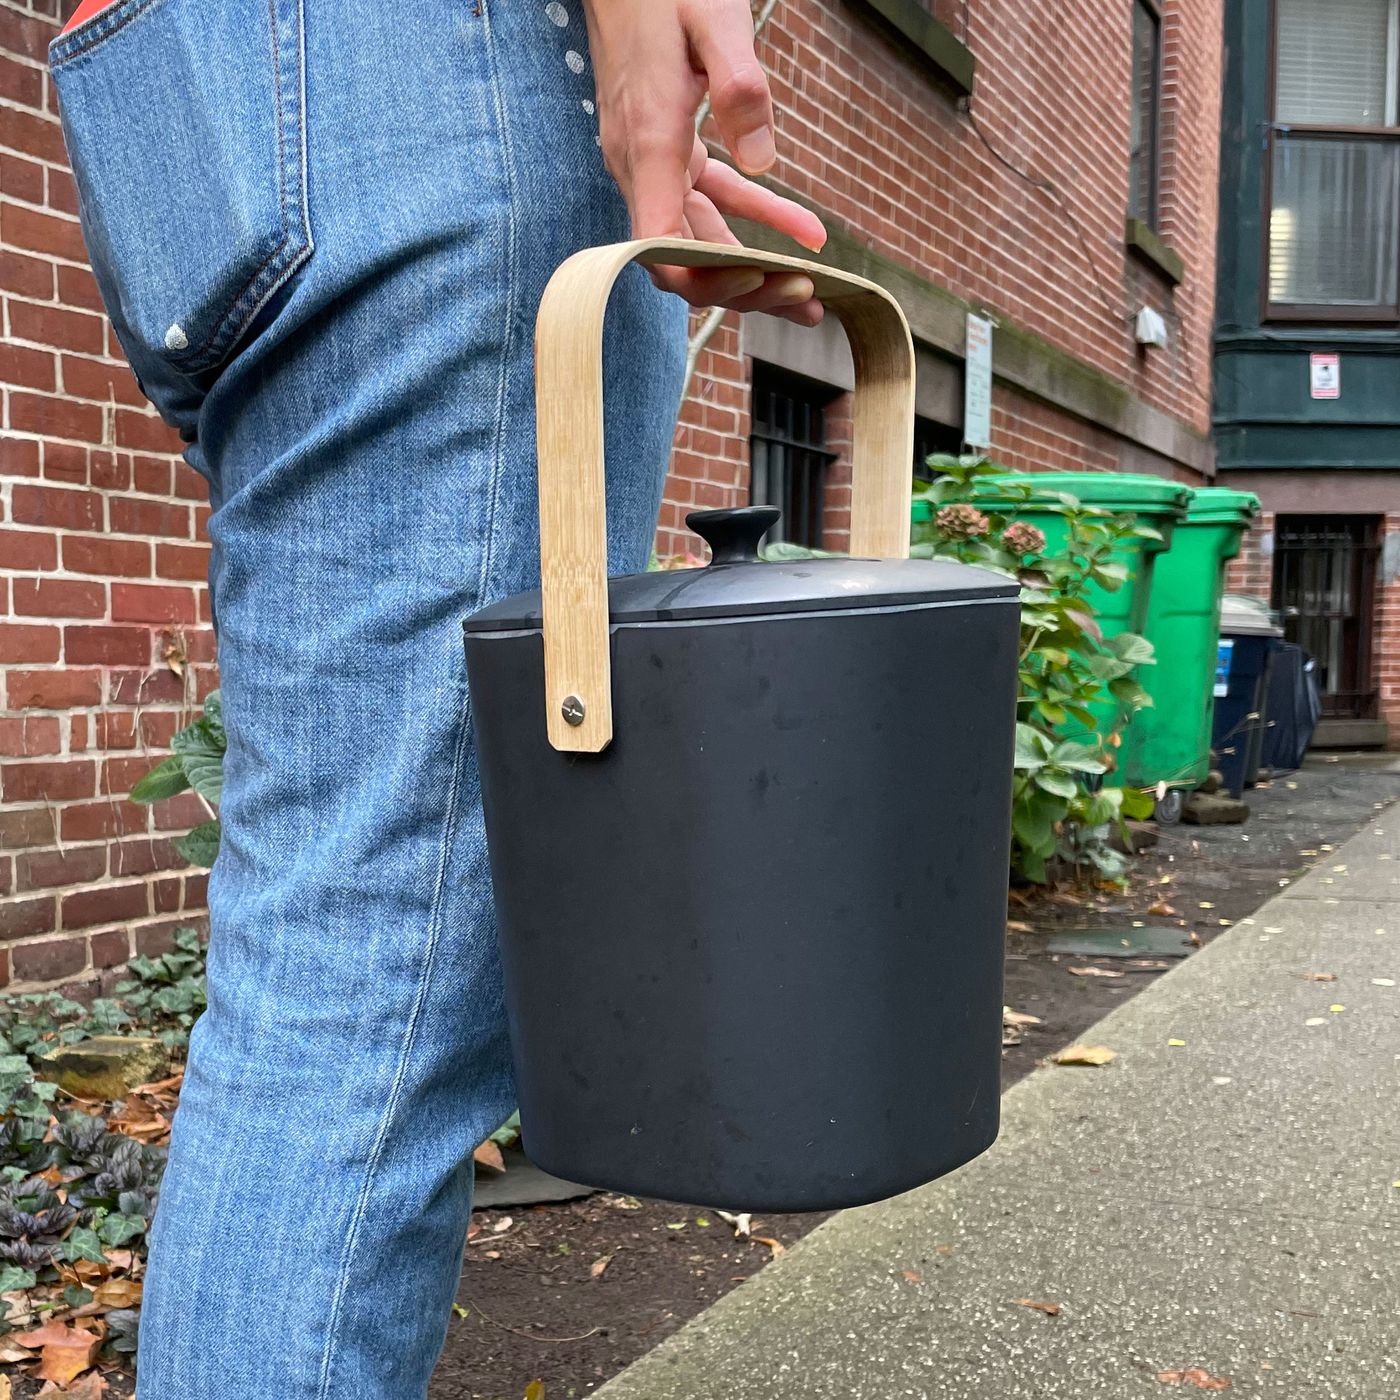 https://pyxis.nymag.com/v1/imgs/6f2/21b/0ace165c314ef85793ccc60dce12a4086b-bamboozle-compost-bin.1x.rsquare.w1400.jpg